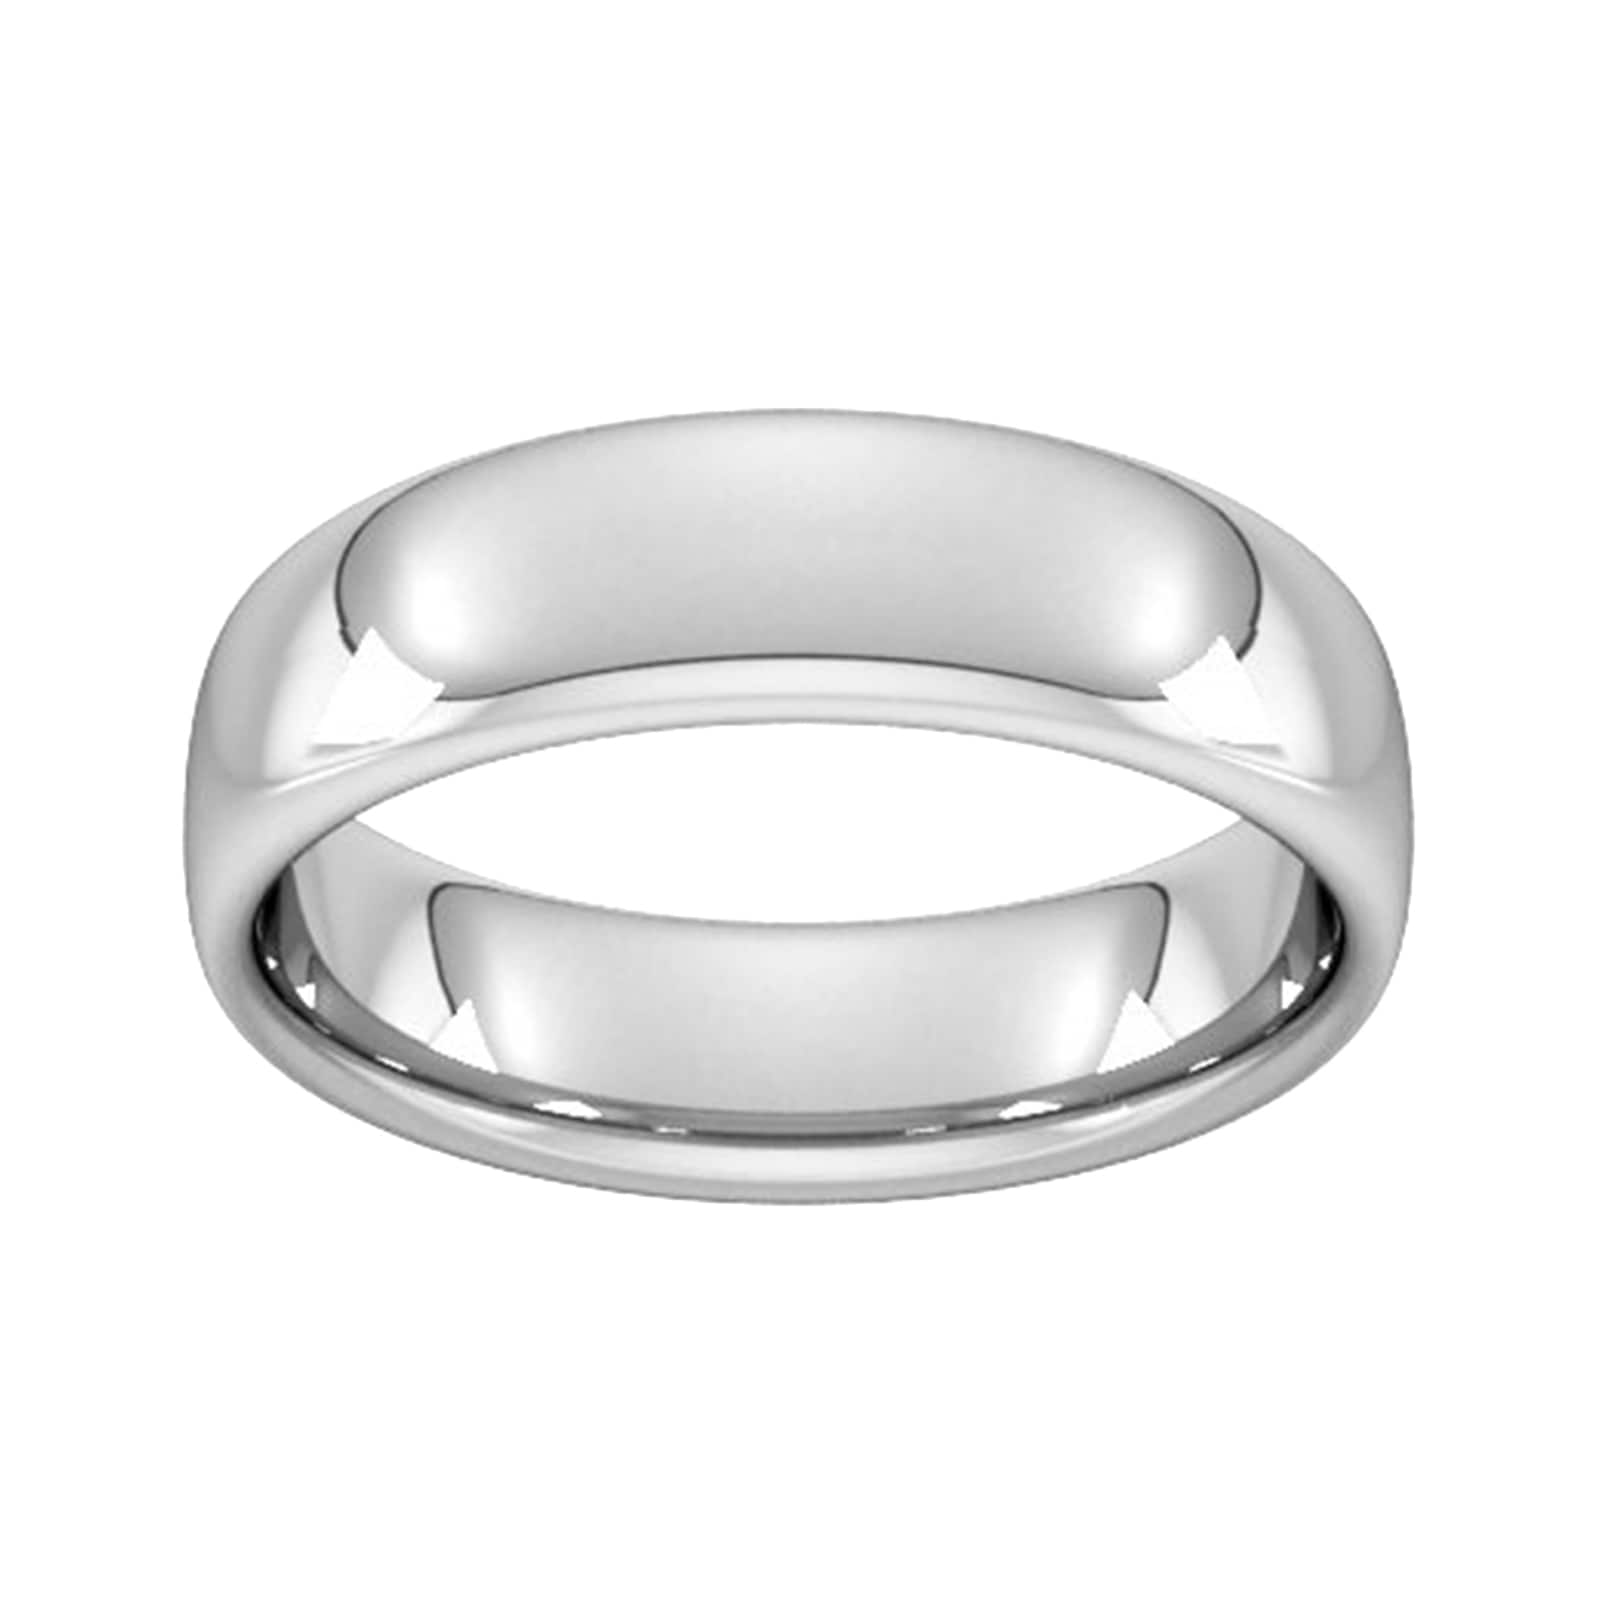 6mm Slight Court Heavy Wedding Ring In Sterling Silver - Ring Size N